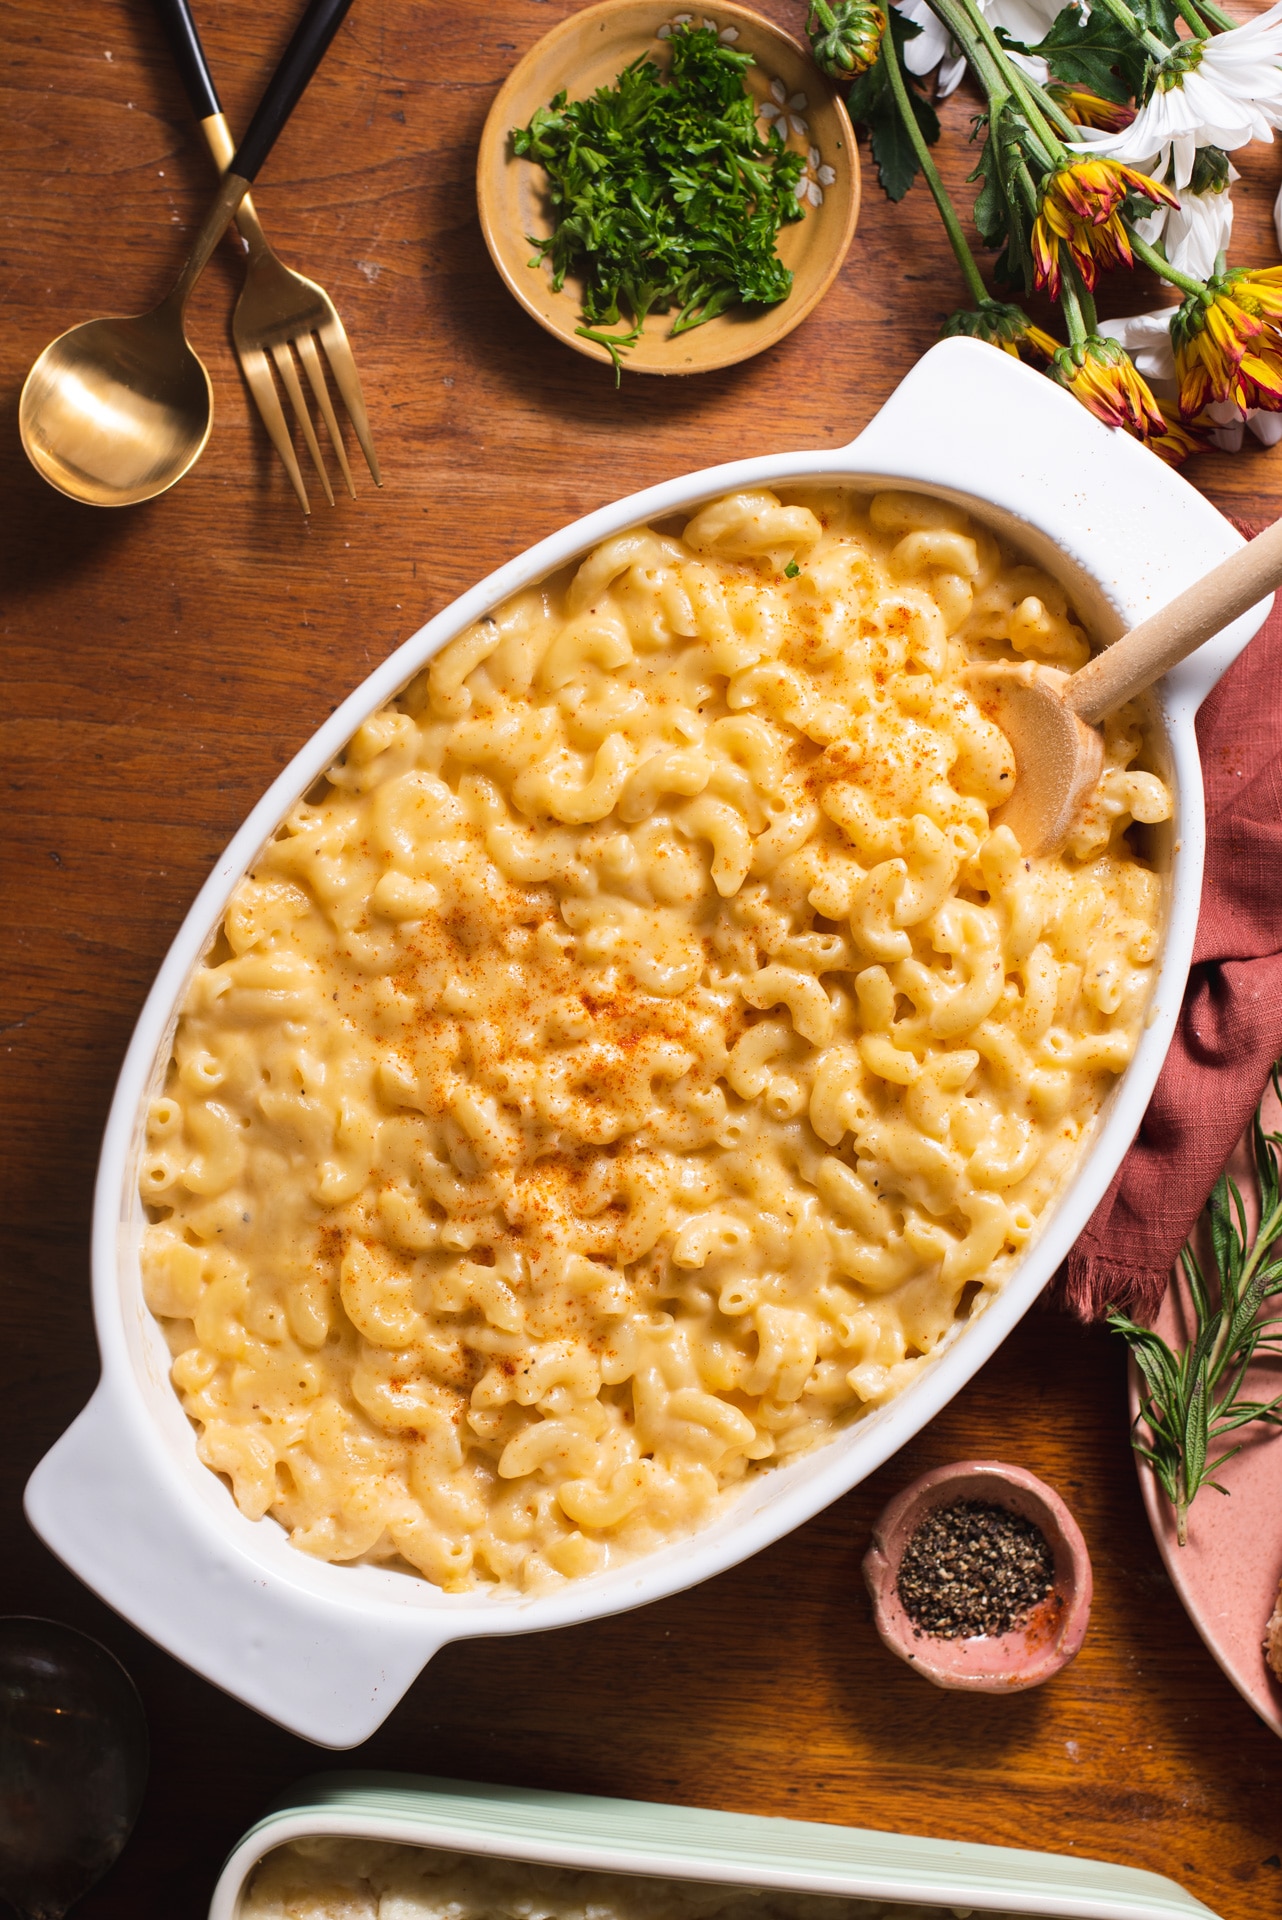 Overhead view of white dish holding mac and cheese on a wooden background